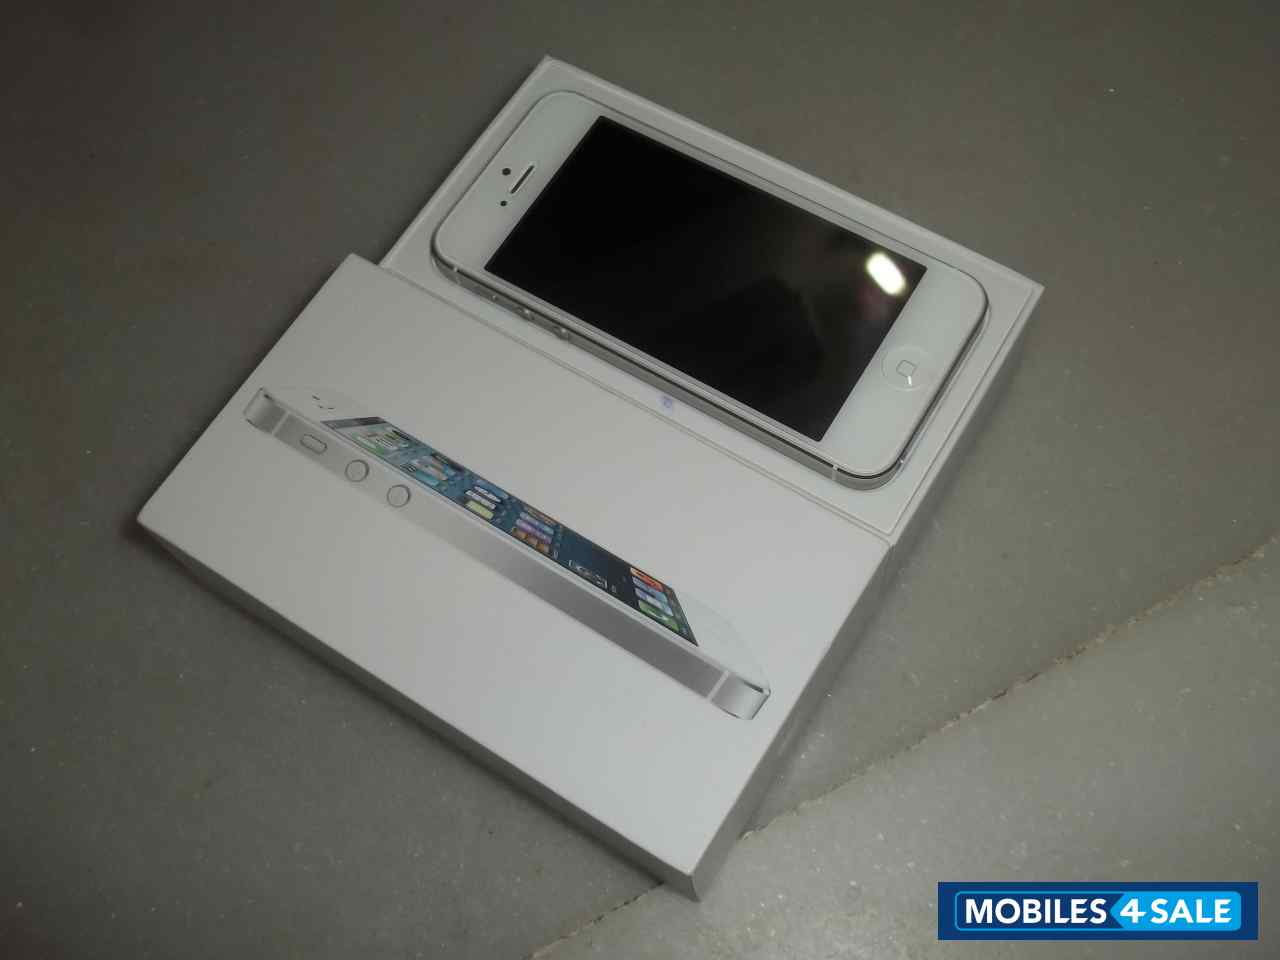 White- Silver 16 Gb Apple iPhone 5